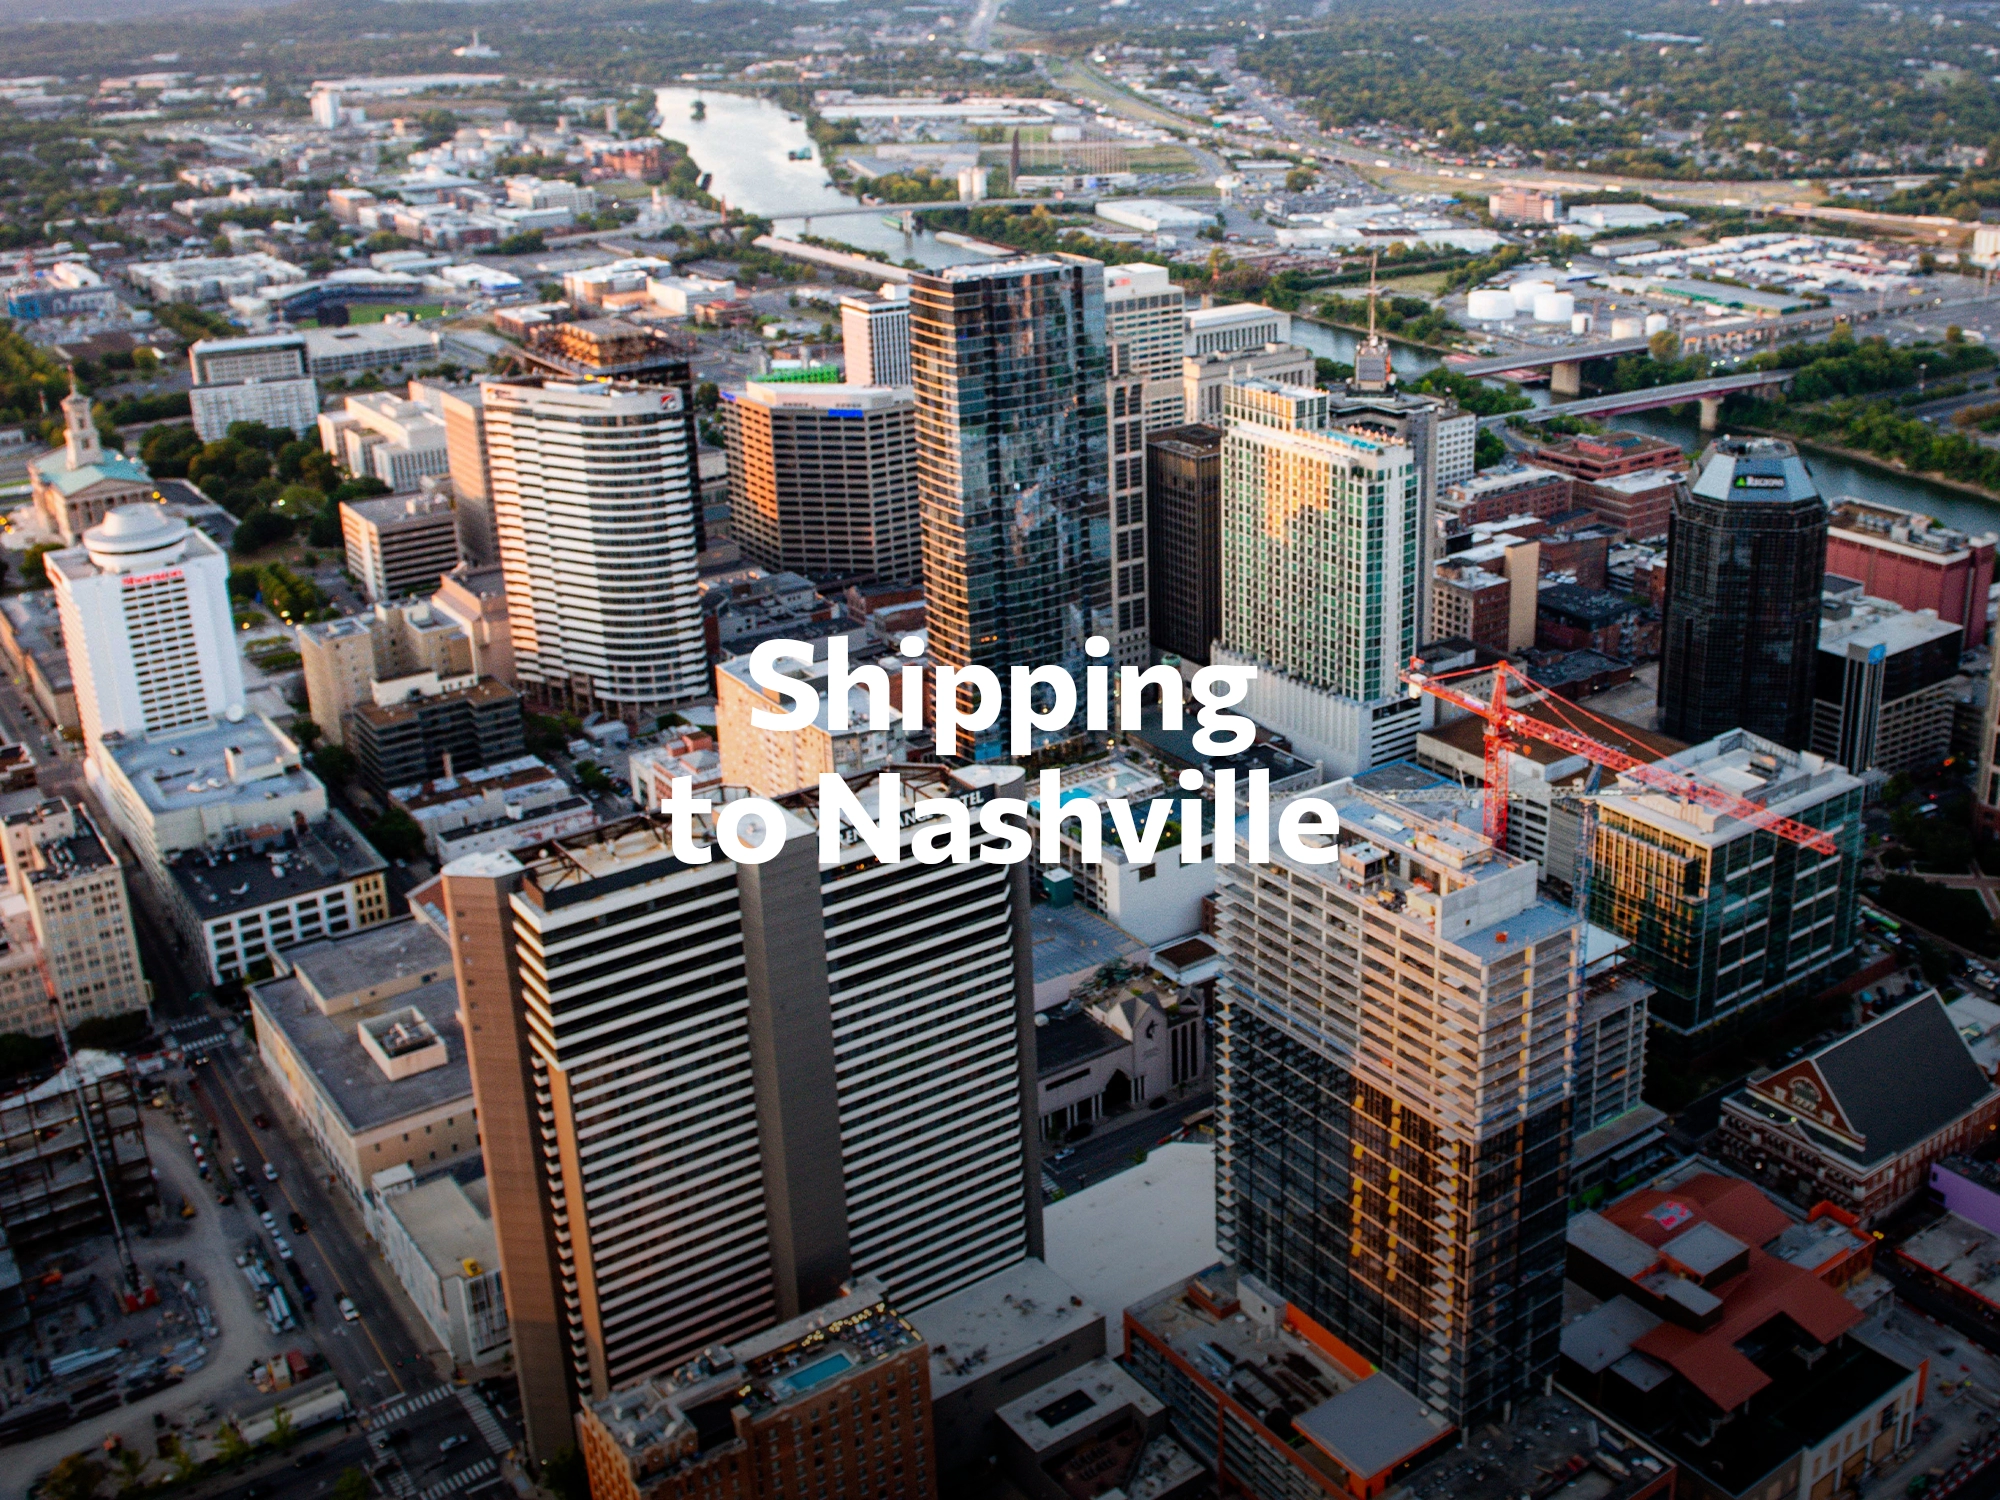 Shipping company to Albuquerque, freight rates for FTL and LTL shipping in Albuquerque